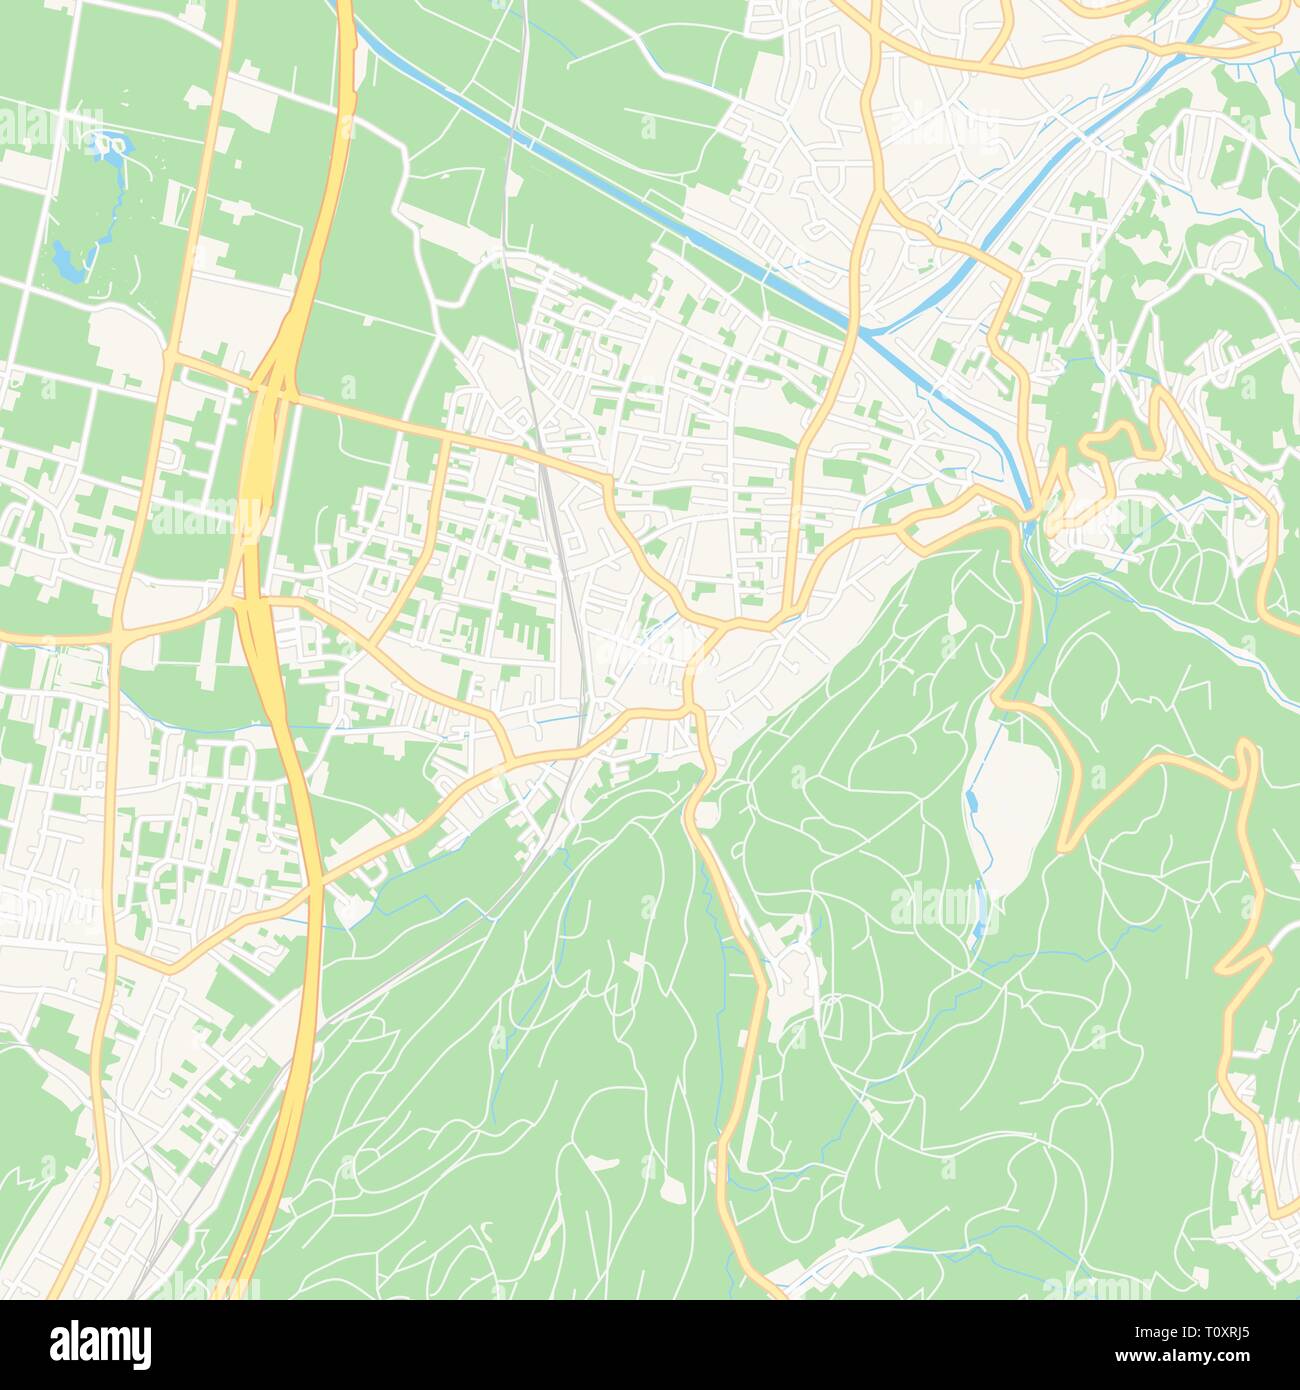 Printable map of Rankweil, Austria with main and secondary roads and larger railways. This map is carefully designed for routing and placing individua Stock Vector